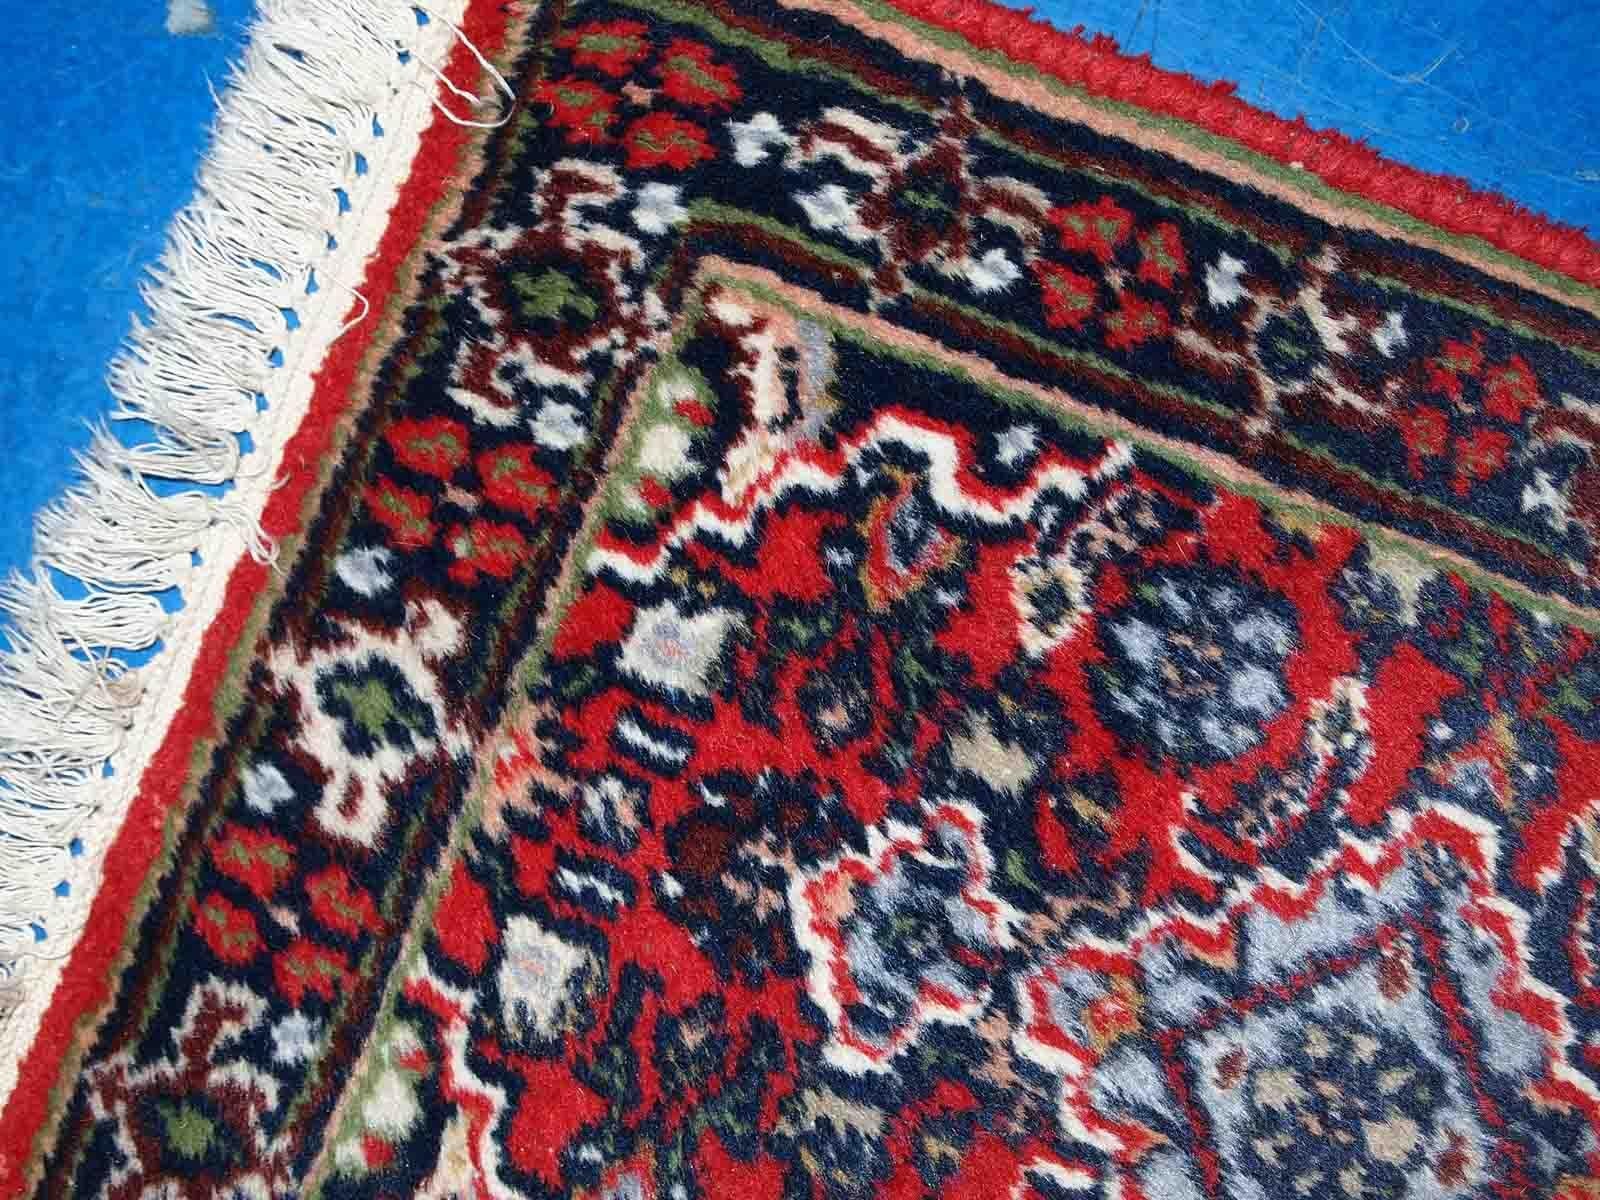 Vintage handmade Middle Eastern Malayer mat in original good condition. The rug is from the end of 20th century in red colour.

-condition: original good,

-circa: 1970s,

-size: 1.3' x 1.9' (40cm x 58cm),

-material: wool,

-country of